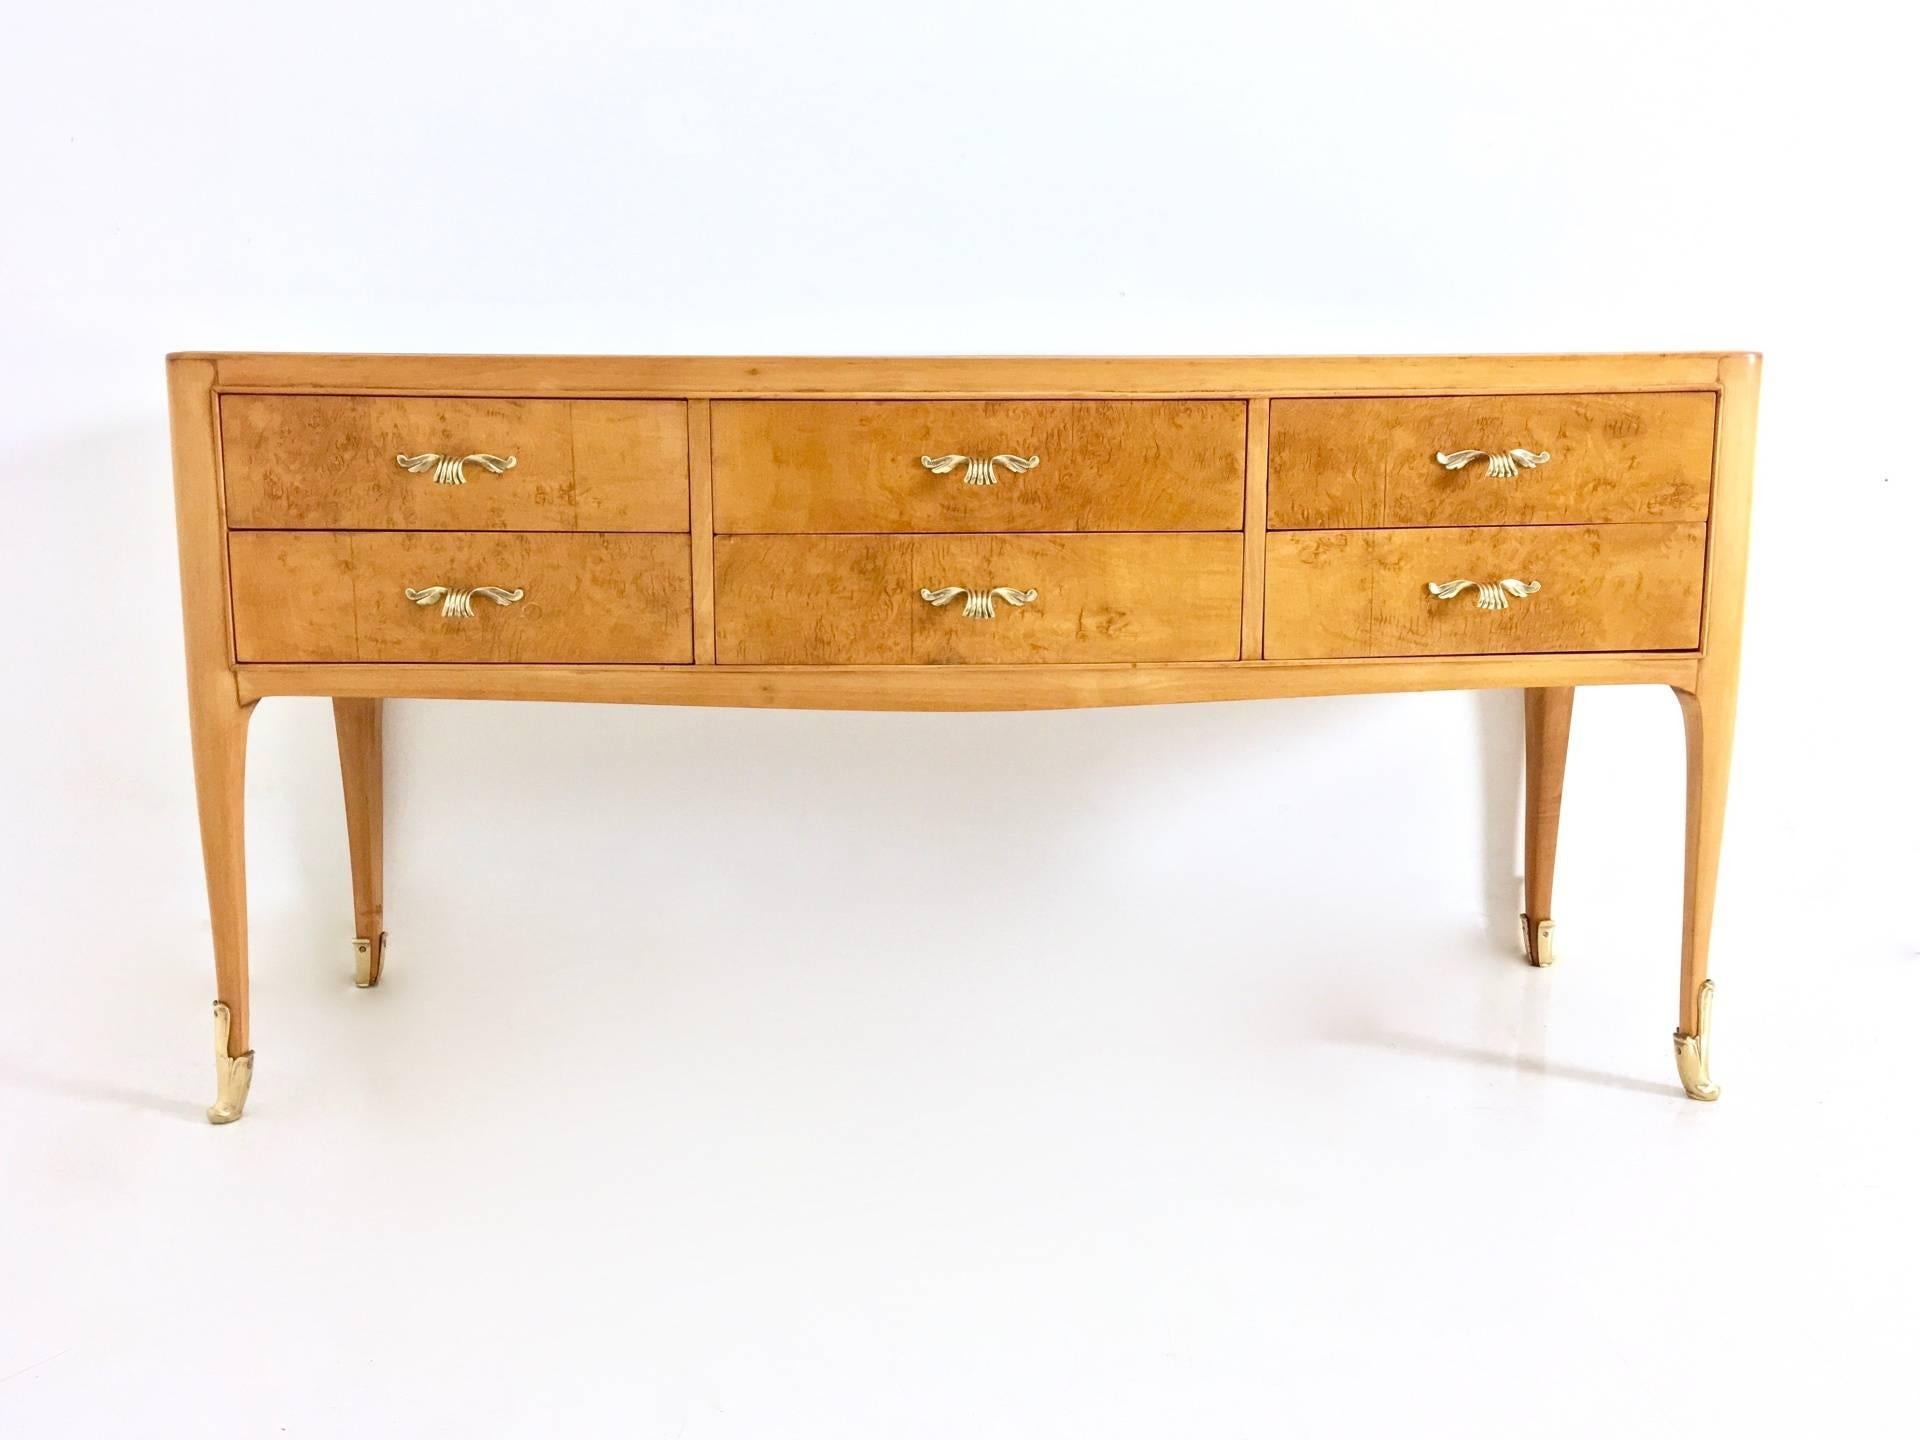 It is a high-quality piece.
Made in maple. It features a back-painted glass top and brass handles.
In excellent condition as it has been perfectly restored.

Measure: Width 114 cm
Depth 40 cm
Height 58 cm.